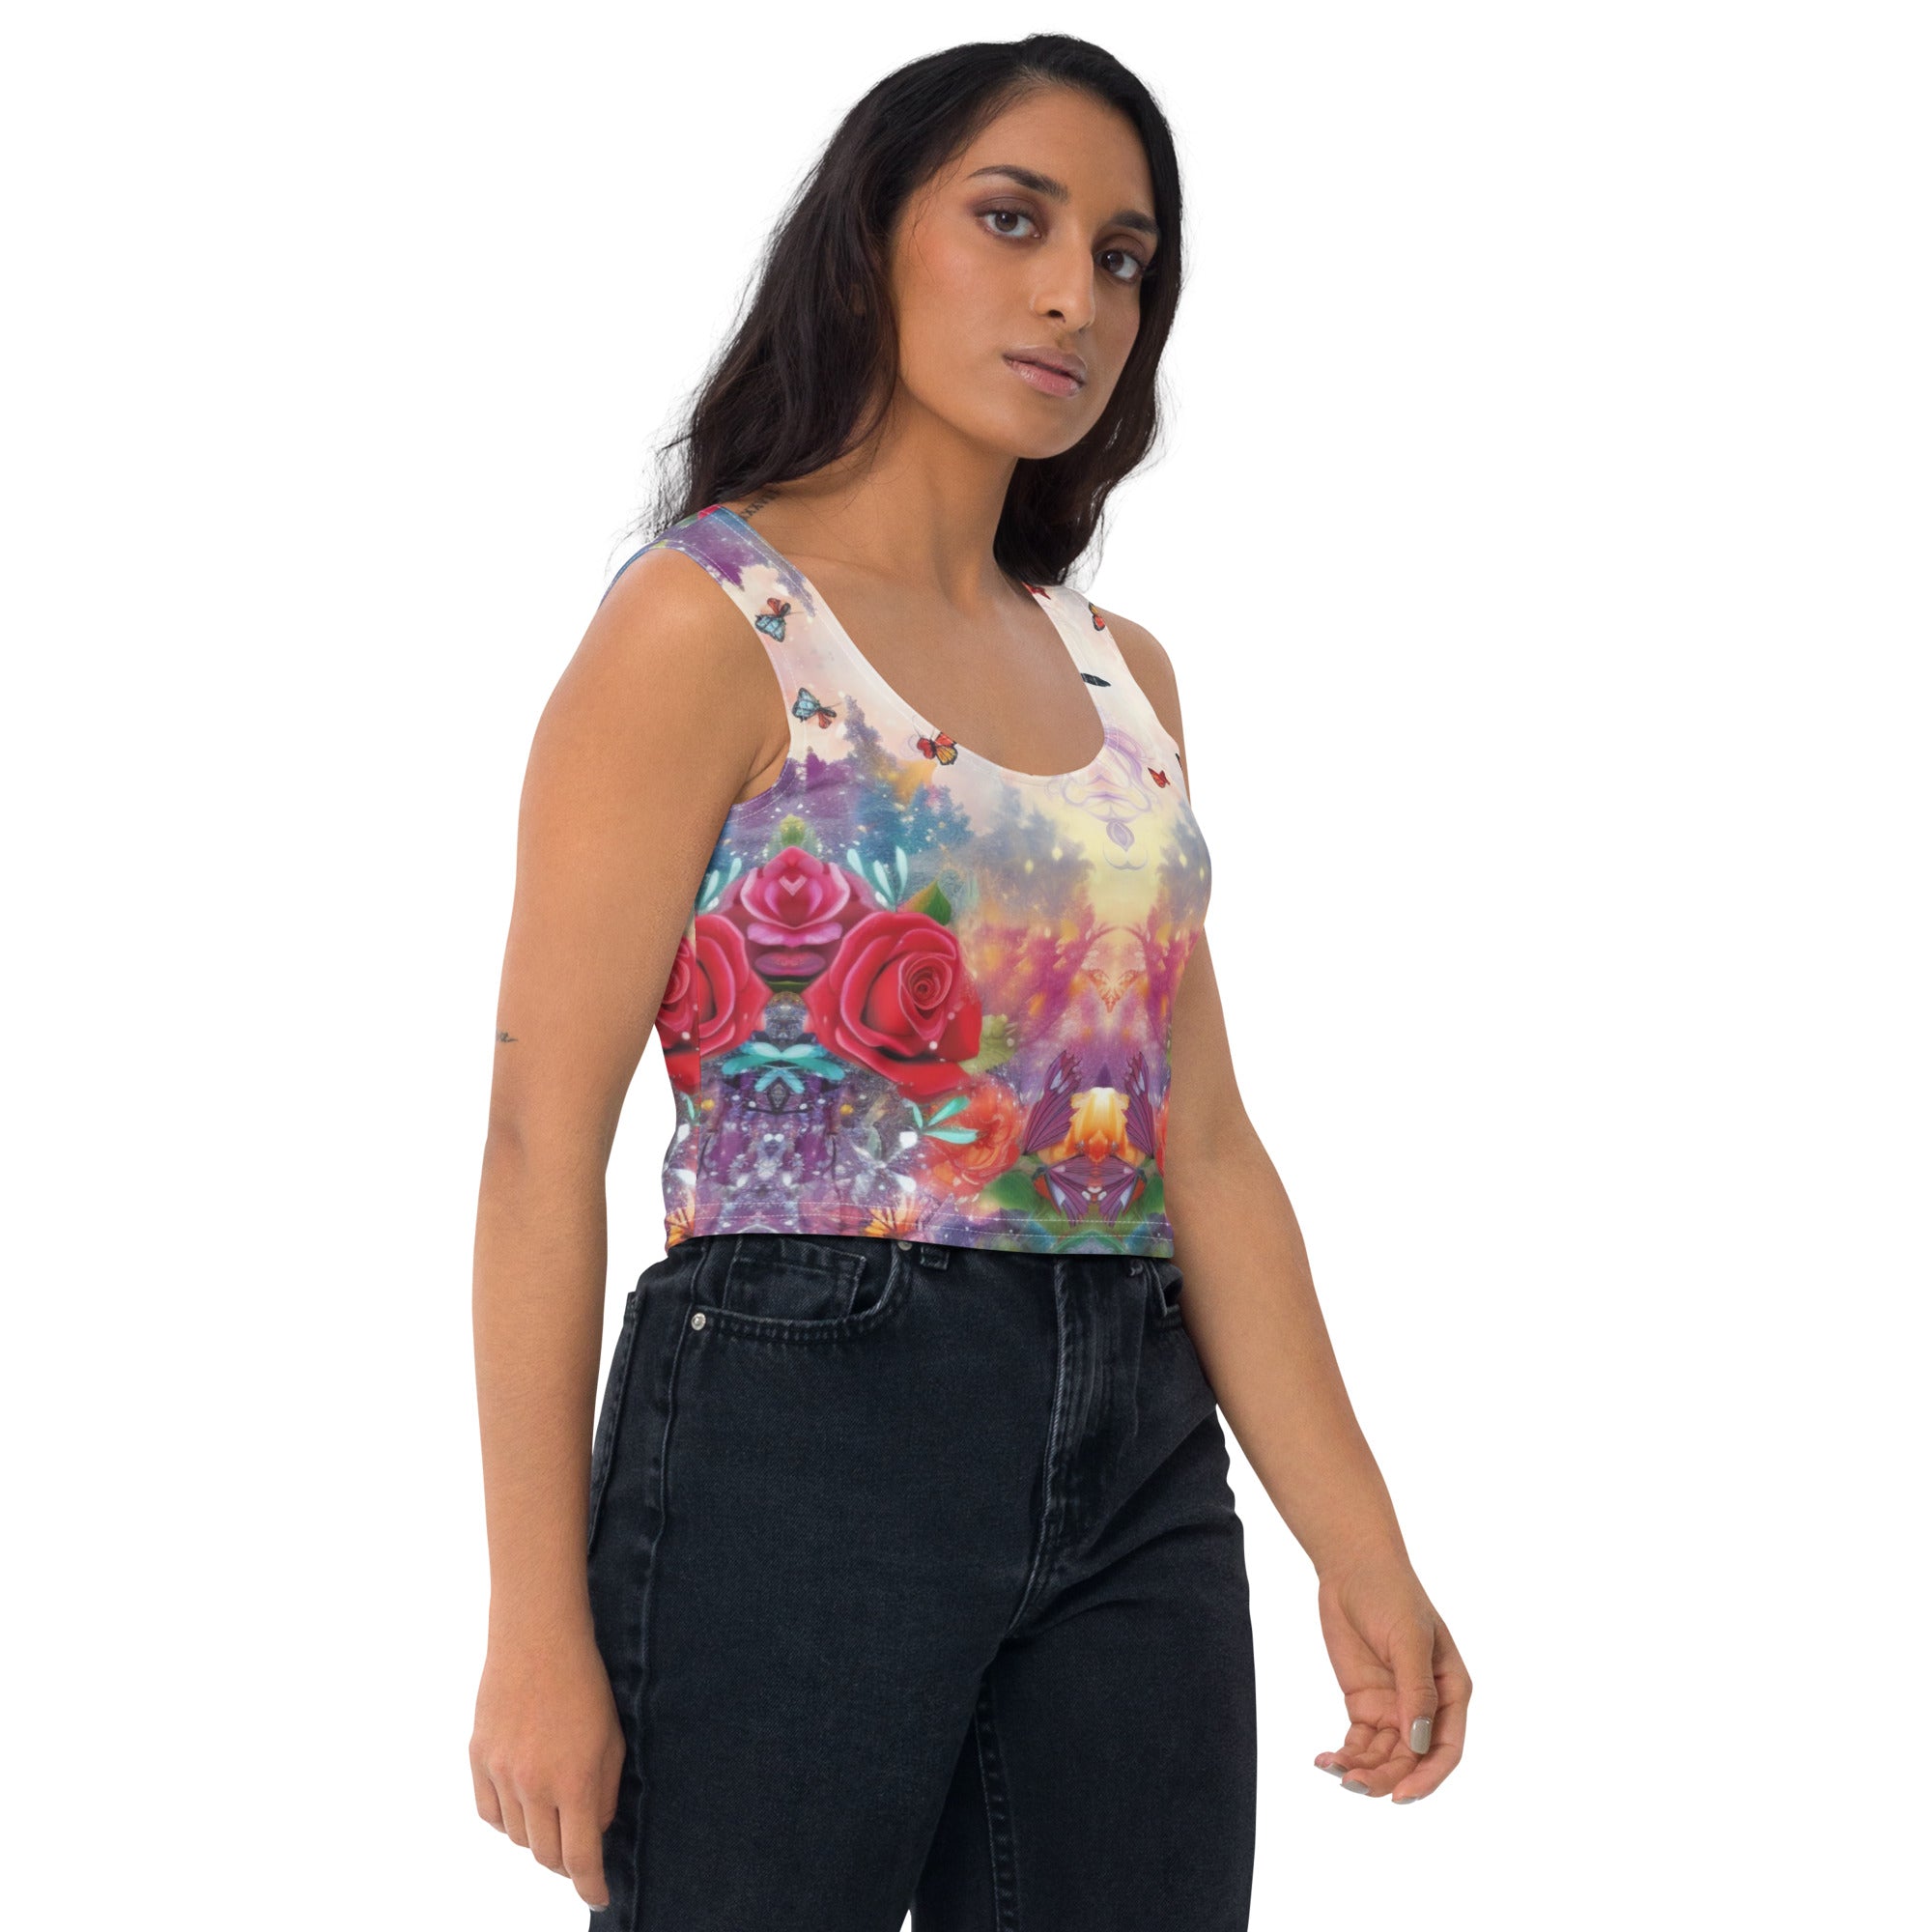 Blossom with Style in our Flower Fairy Crop Top | Girl Crop Top | Women Crop Top | Girls Night Shirt | Party Shirt | Flower Fairy Shirt